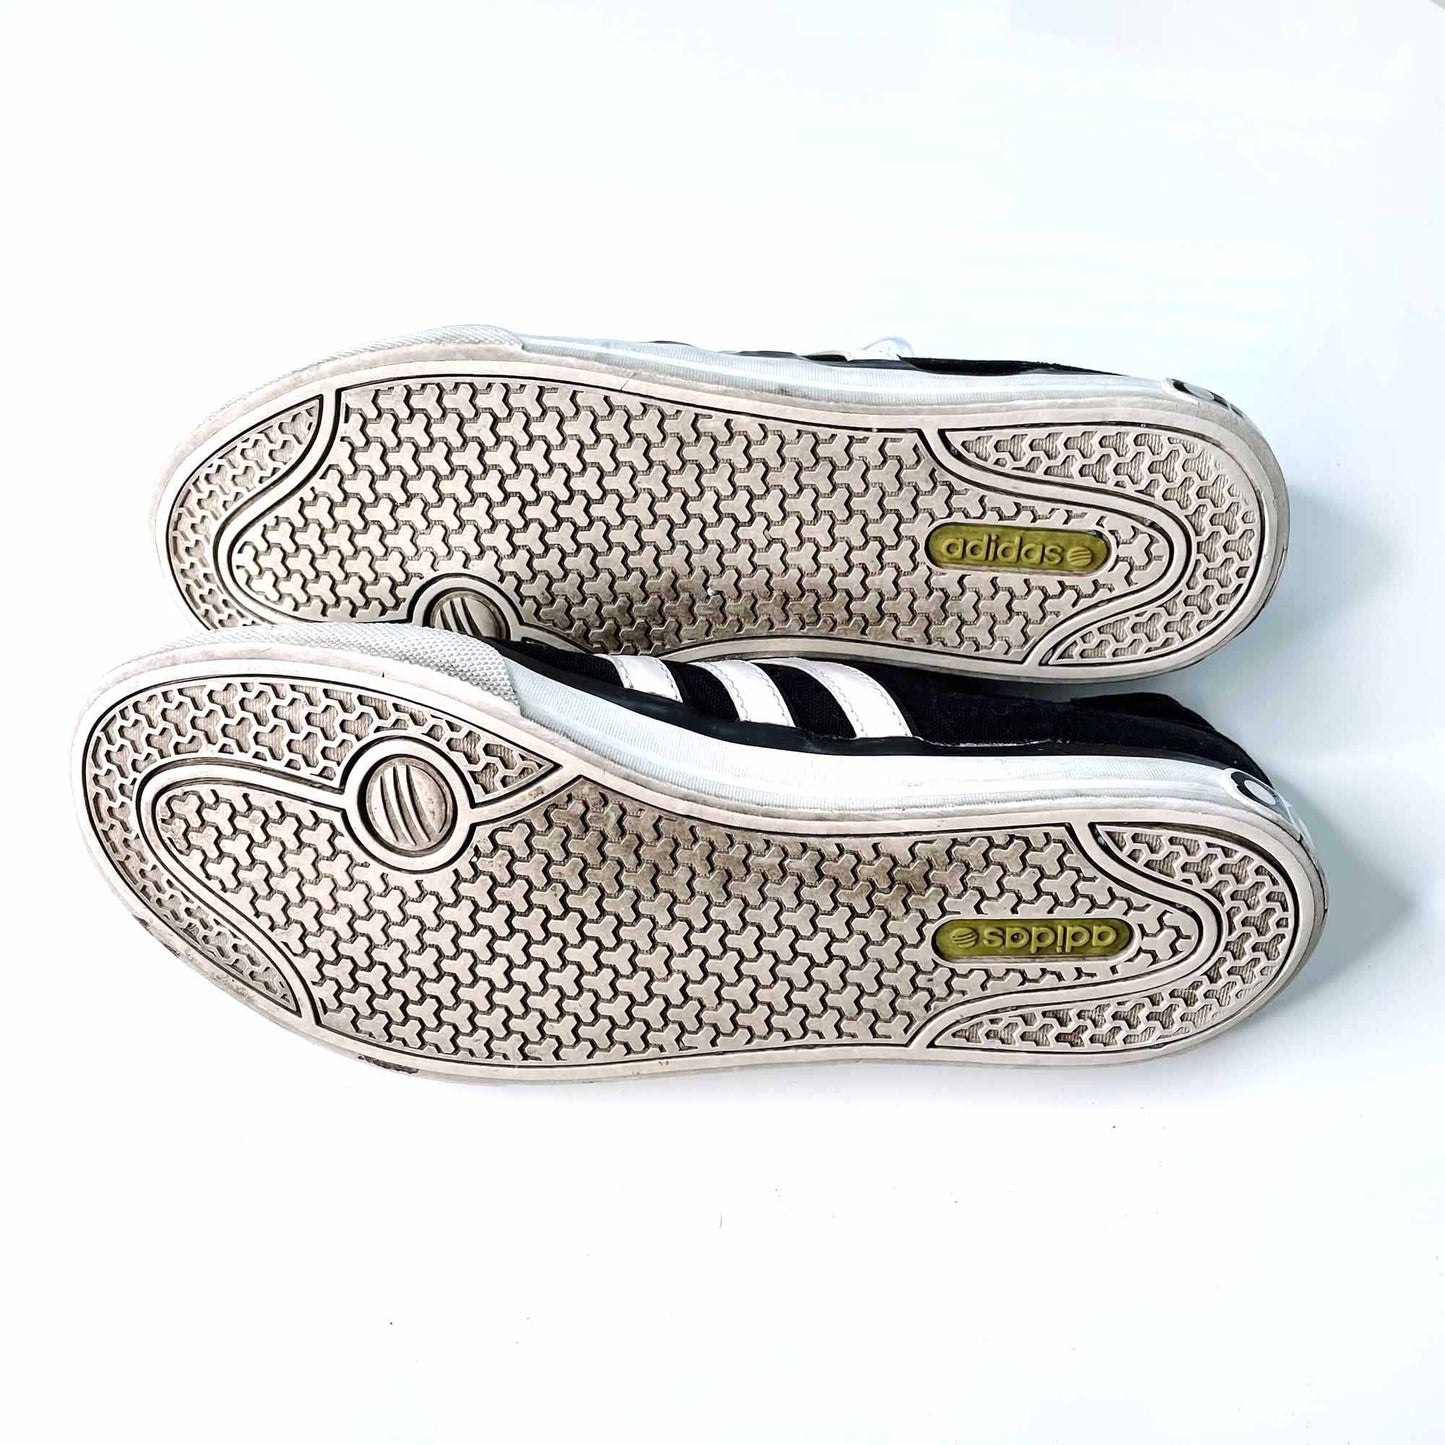 men's adidas vibetouch low profile sneakers - size 10.5